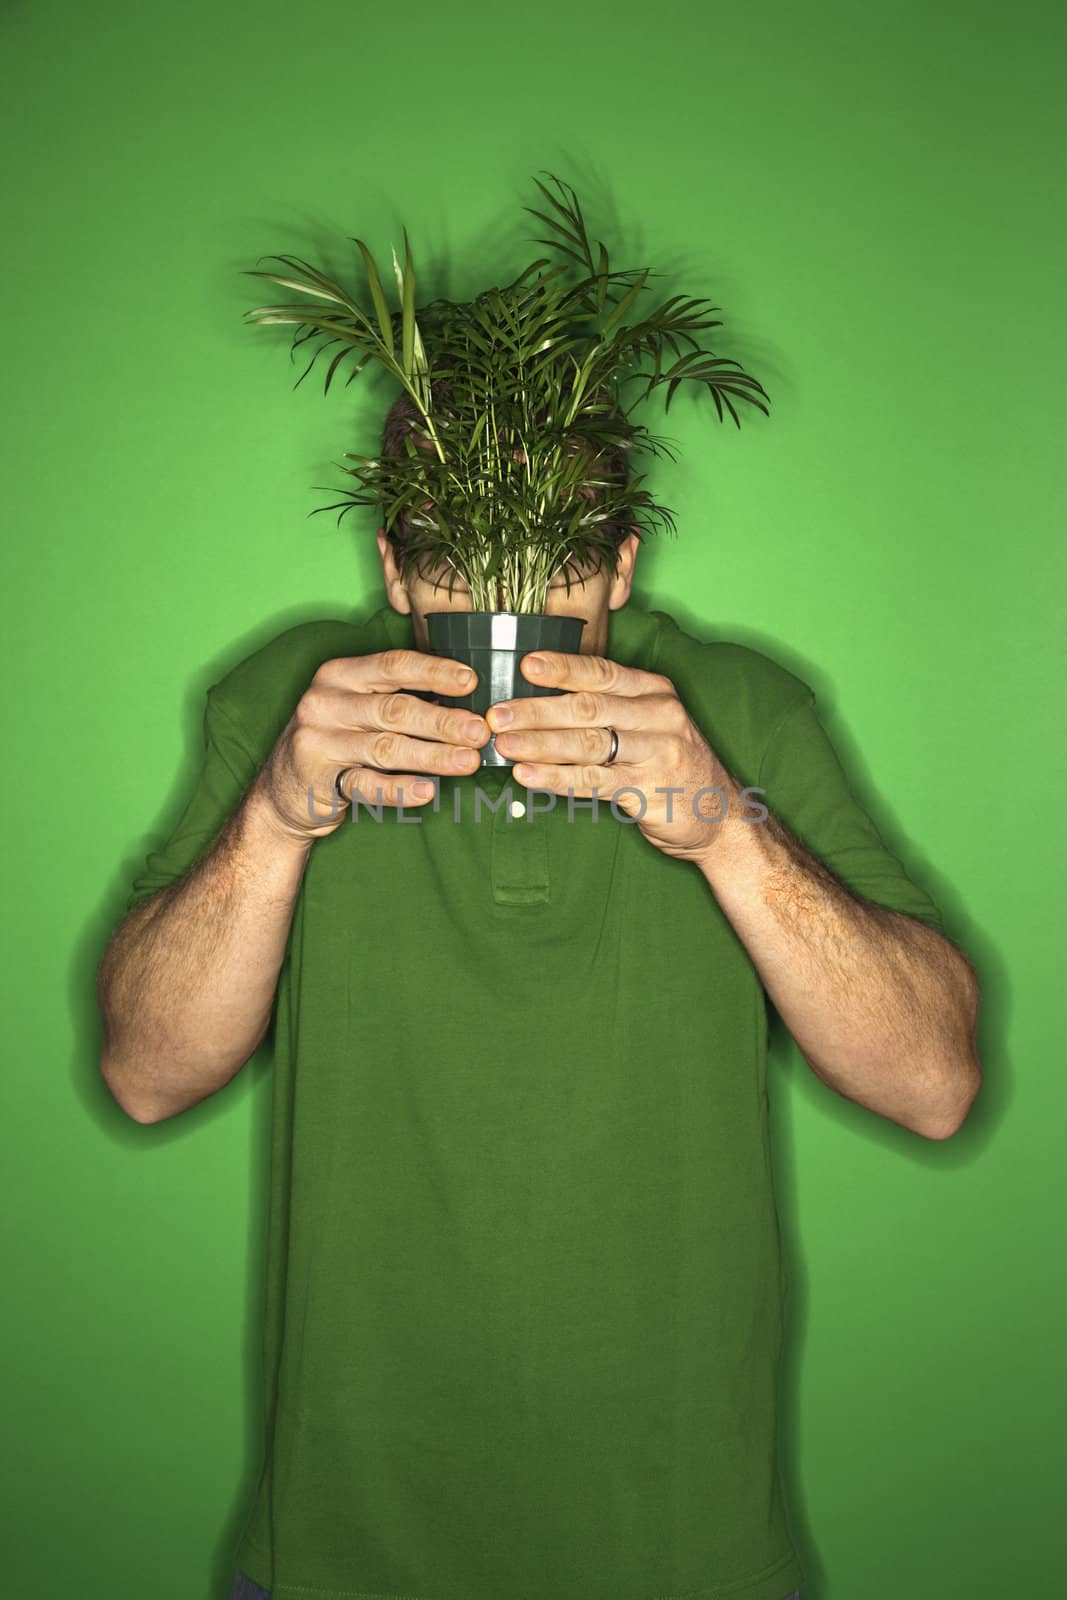 Portrait of adult Caucasian man on green background holding plant in front of his face.